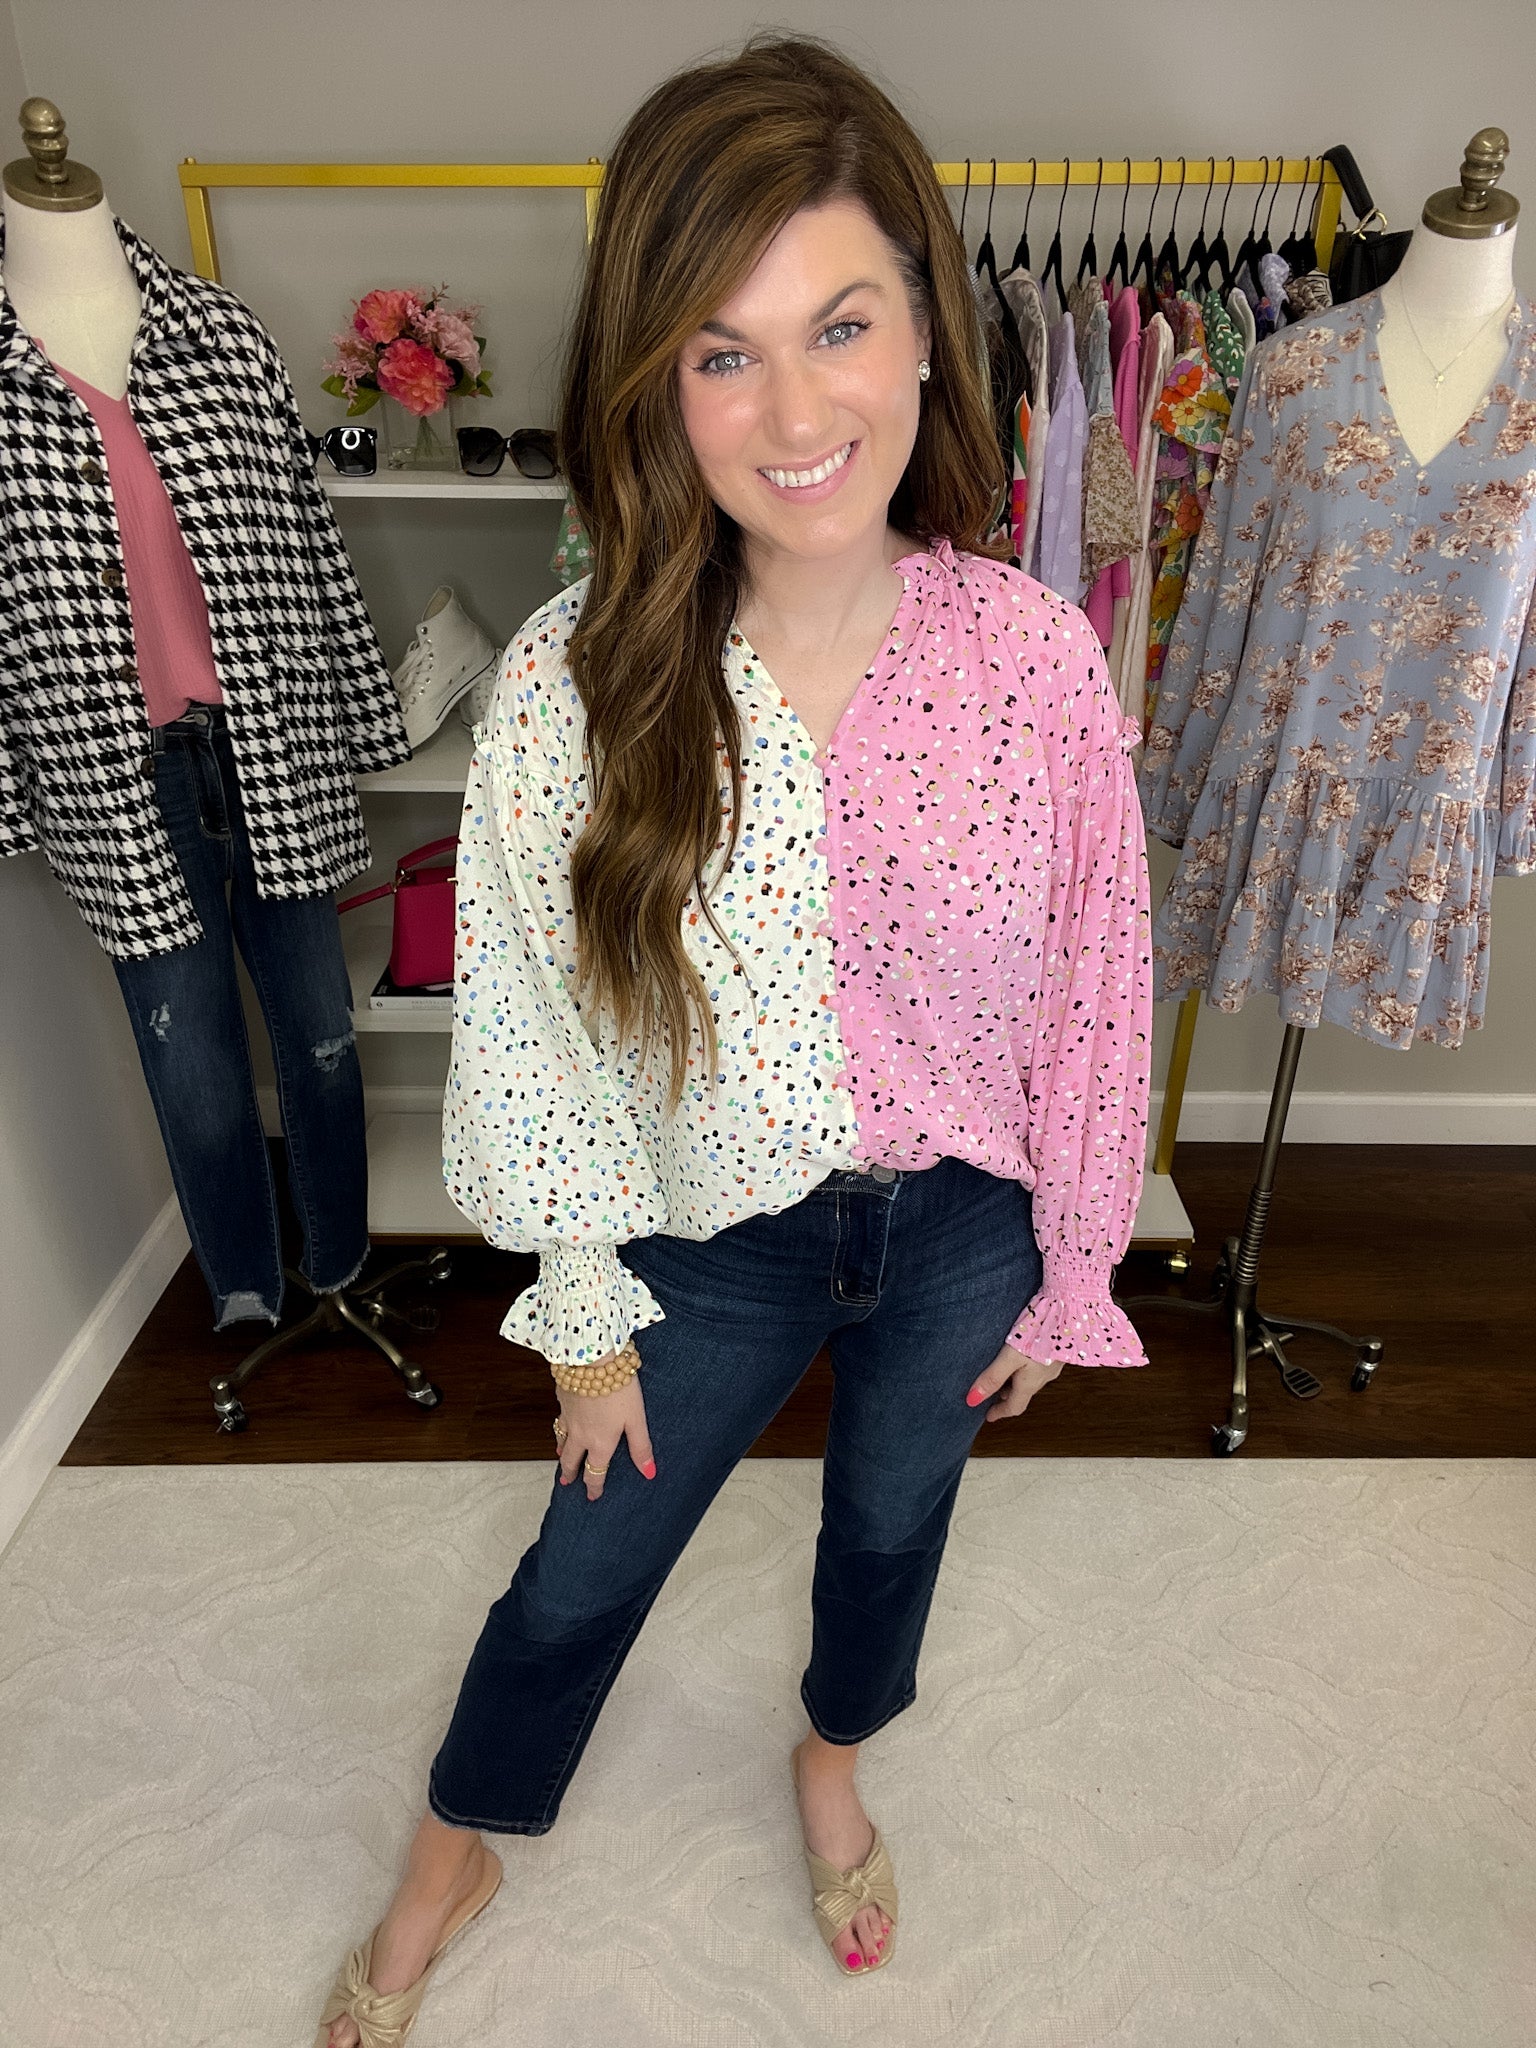 Risen A-Game Jeans – Belles and Whistles Boutique